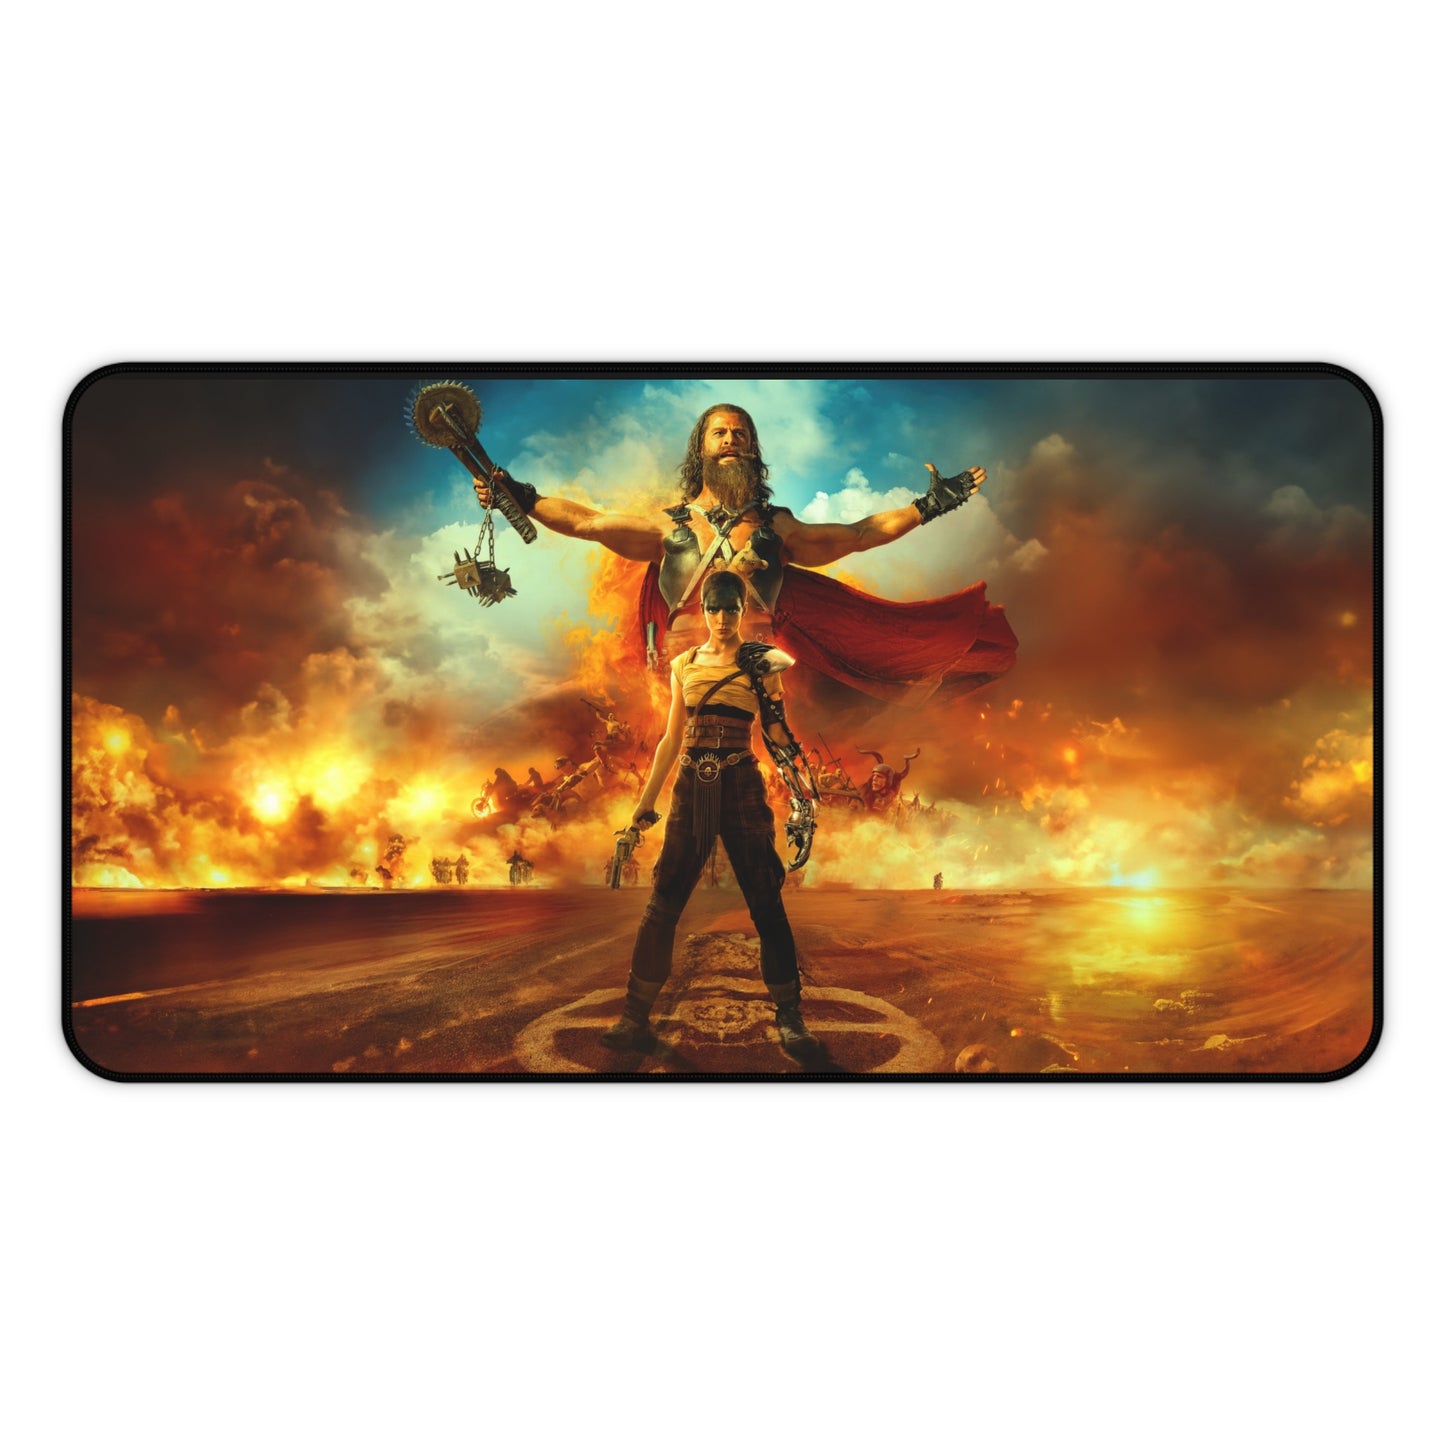 Mad Max 2 Furiosa High Definition Game Home Video Game PC PS Desk Mat Mousepad